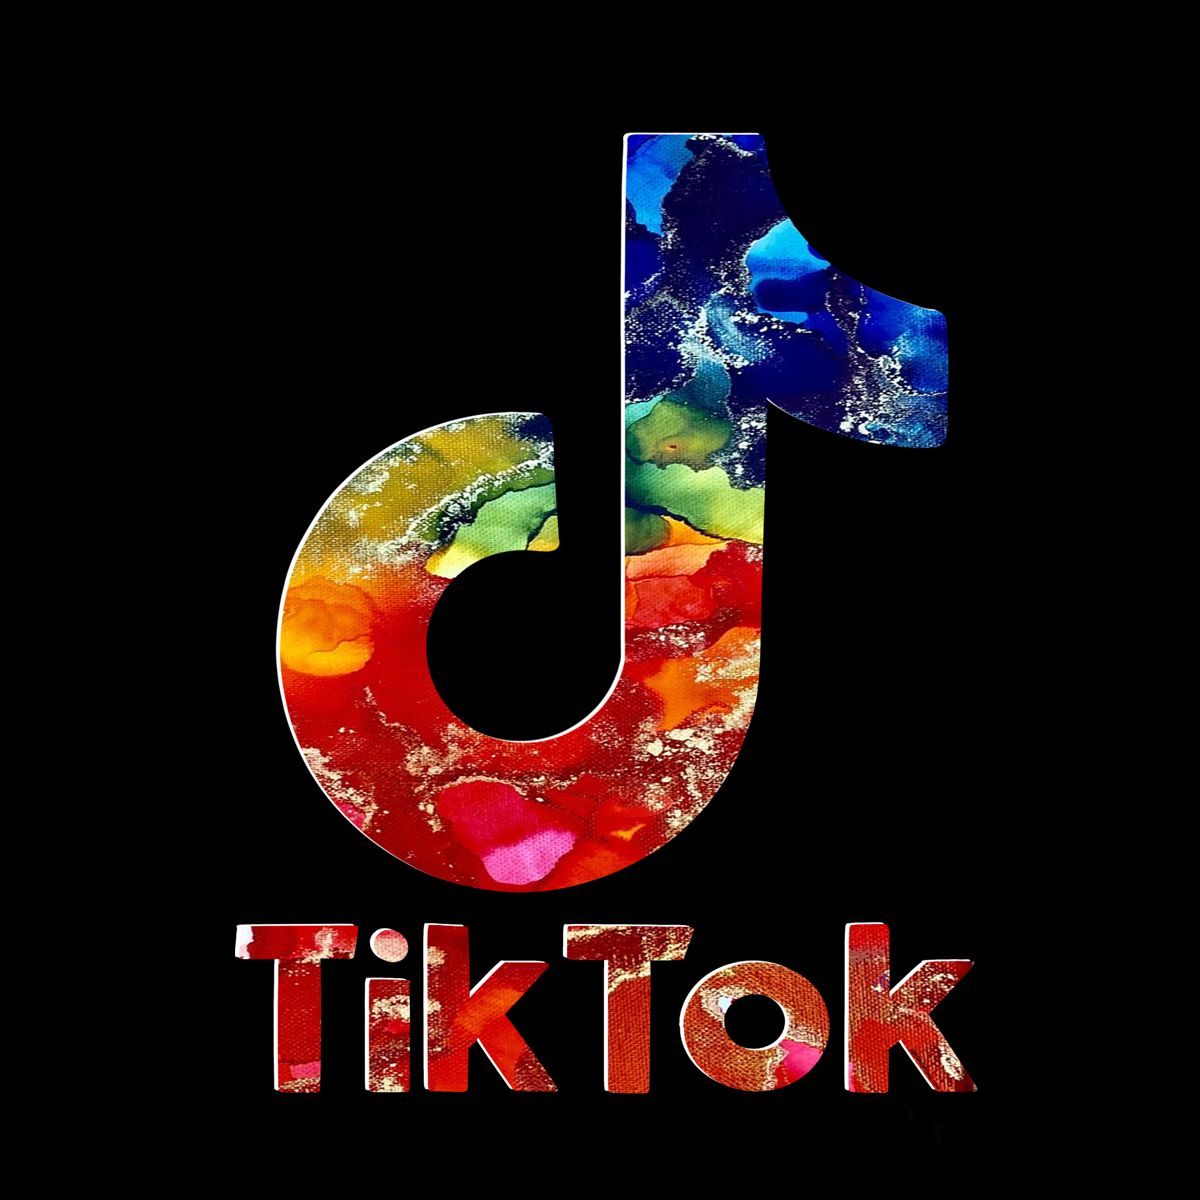 create a tiktok dance video to promote your music